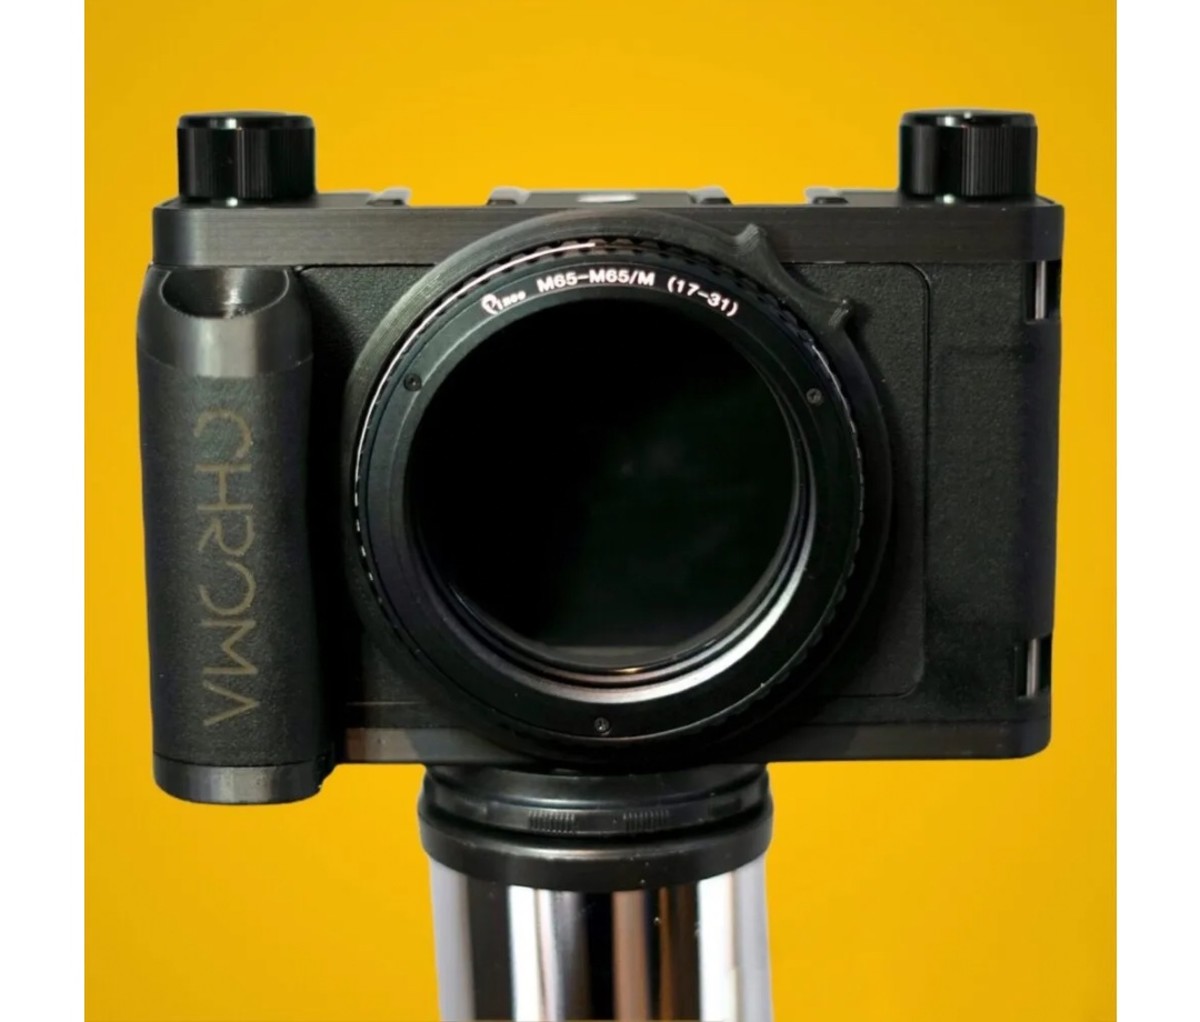 Become a medium-format master with the Chroma Six:9 camera system.